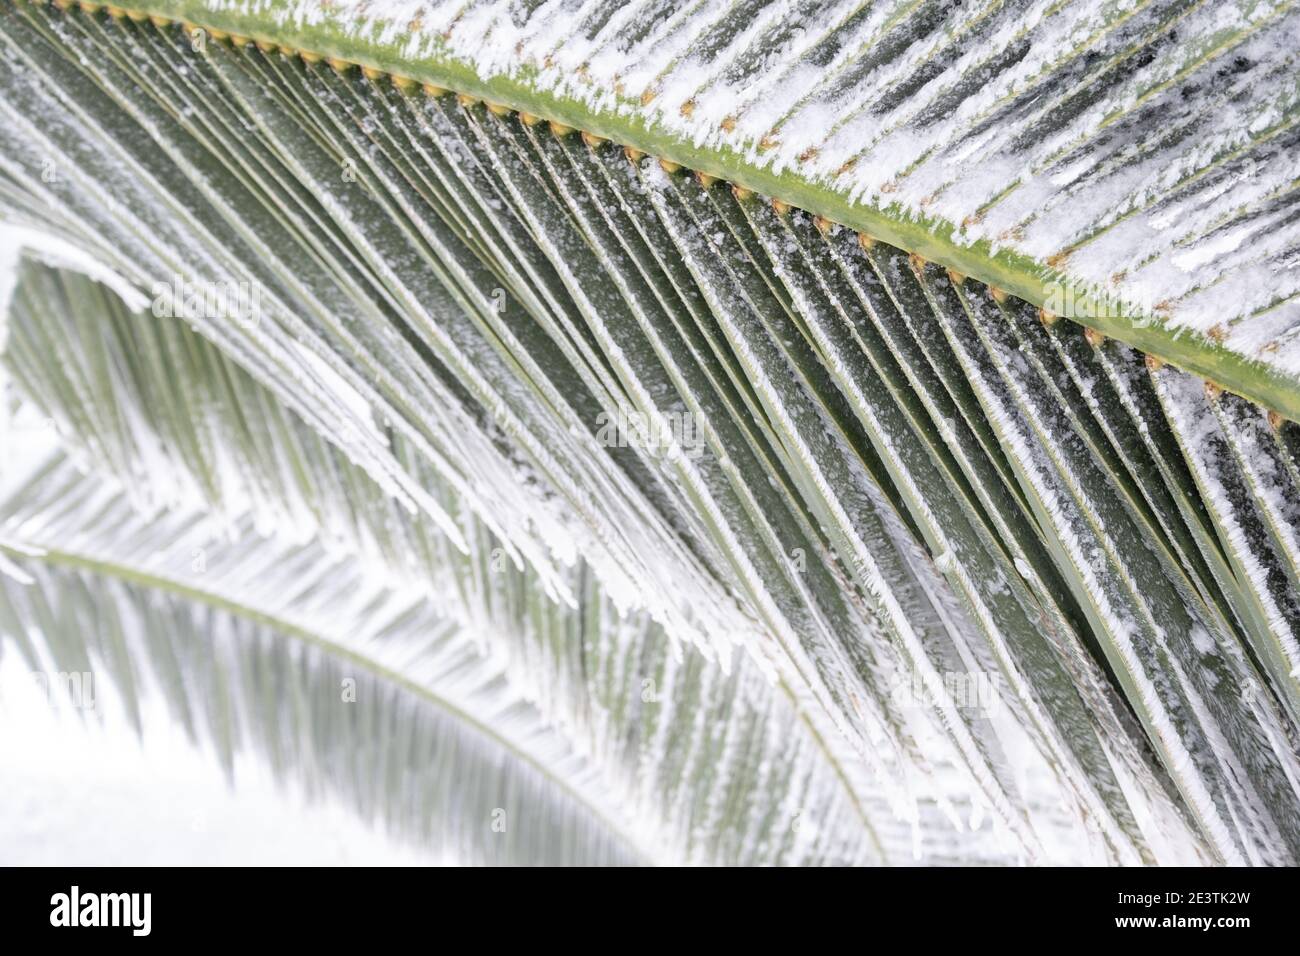 an unusual image of a palm leaf completely bent by a thick layer of snow, concept for climate change. Spain, extremadura. Stock Photo